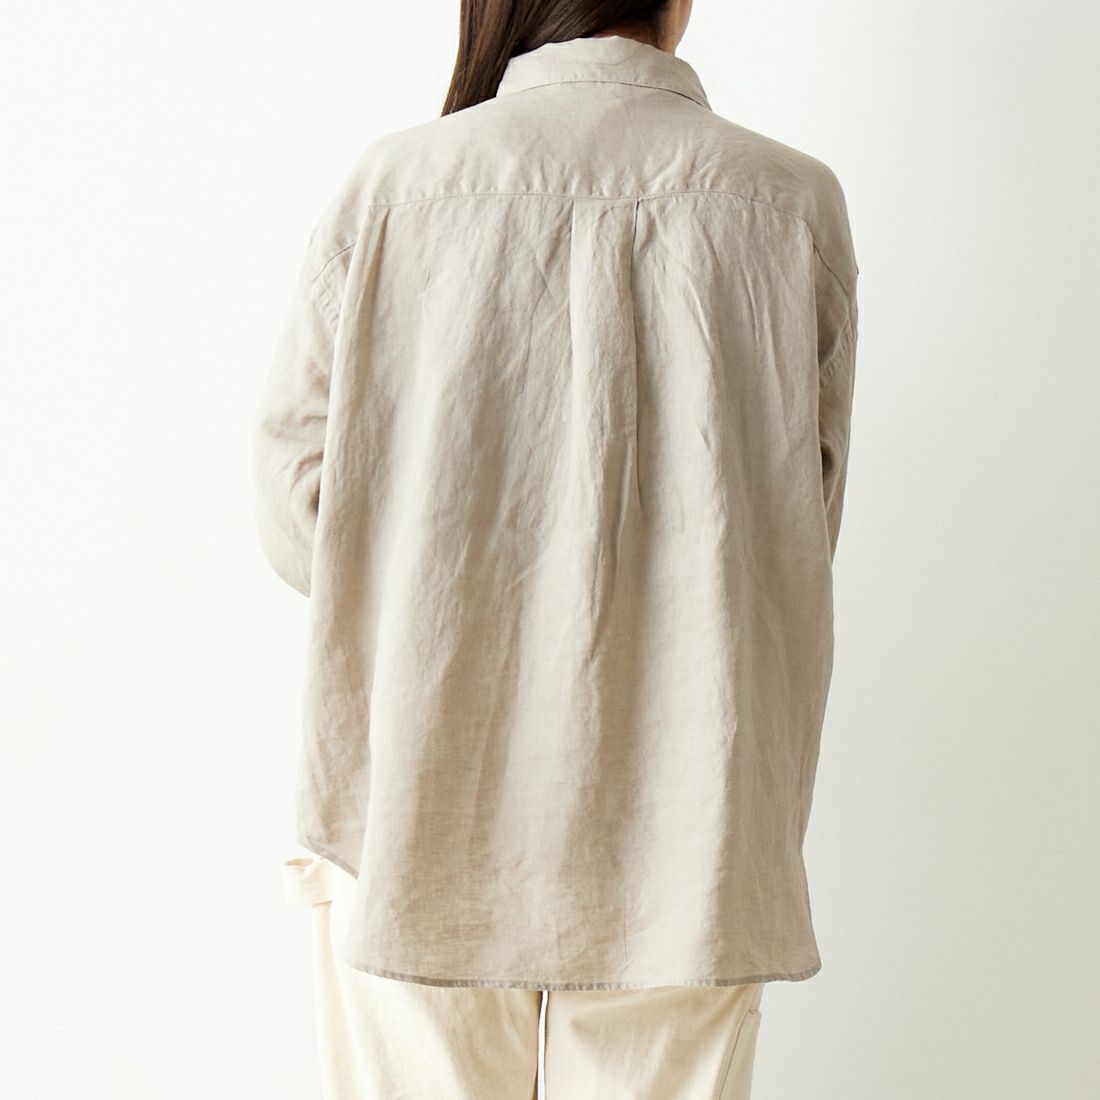 Jeans Factory Clothes [ジーンズファクトリークローズ] ロングスリーブ リネンシャツ [LFE100] 710 BEIGE